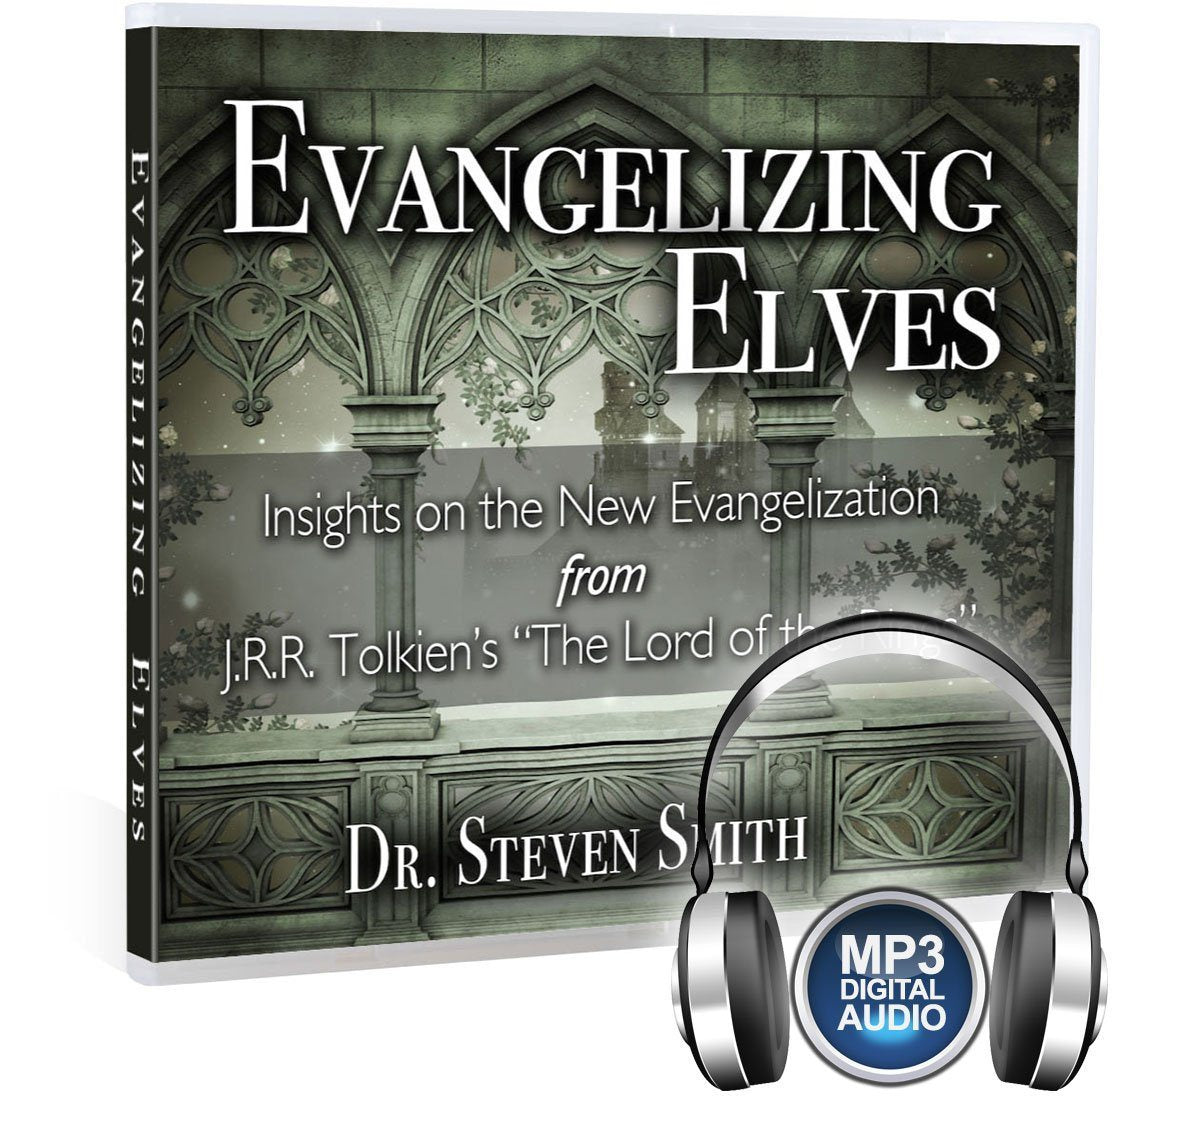 Dr. Steven Smith uses clues from the Lord of the Rings to help Catholics evangelize CD